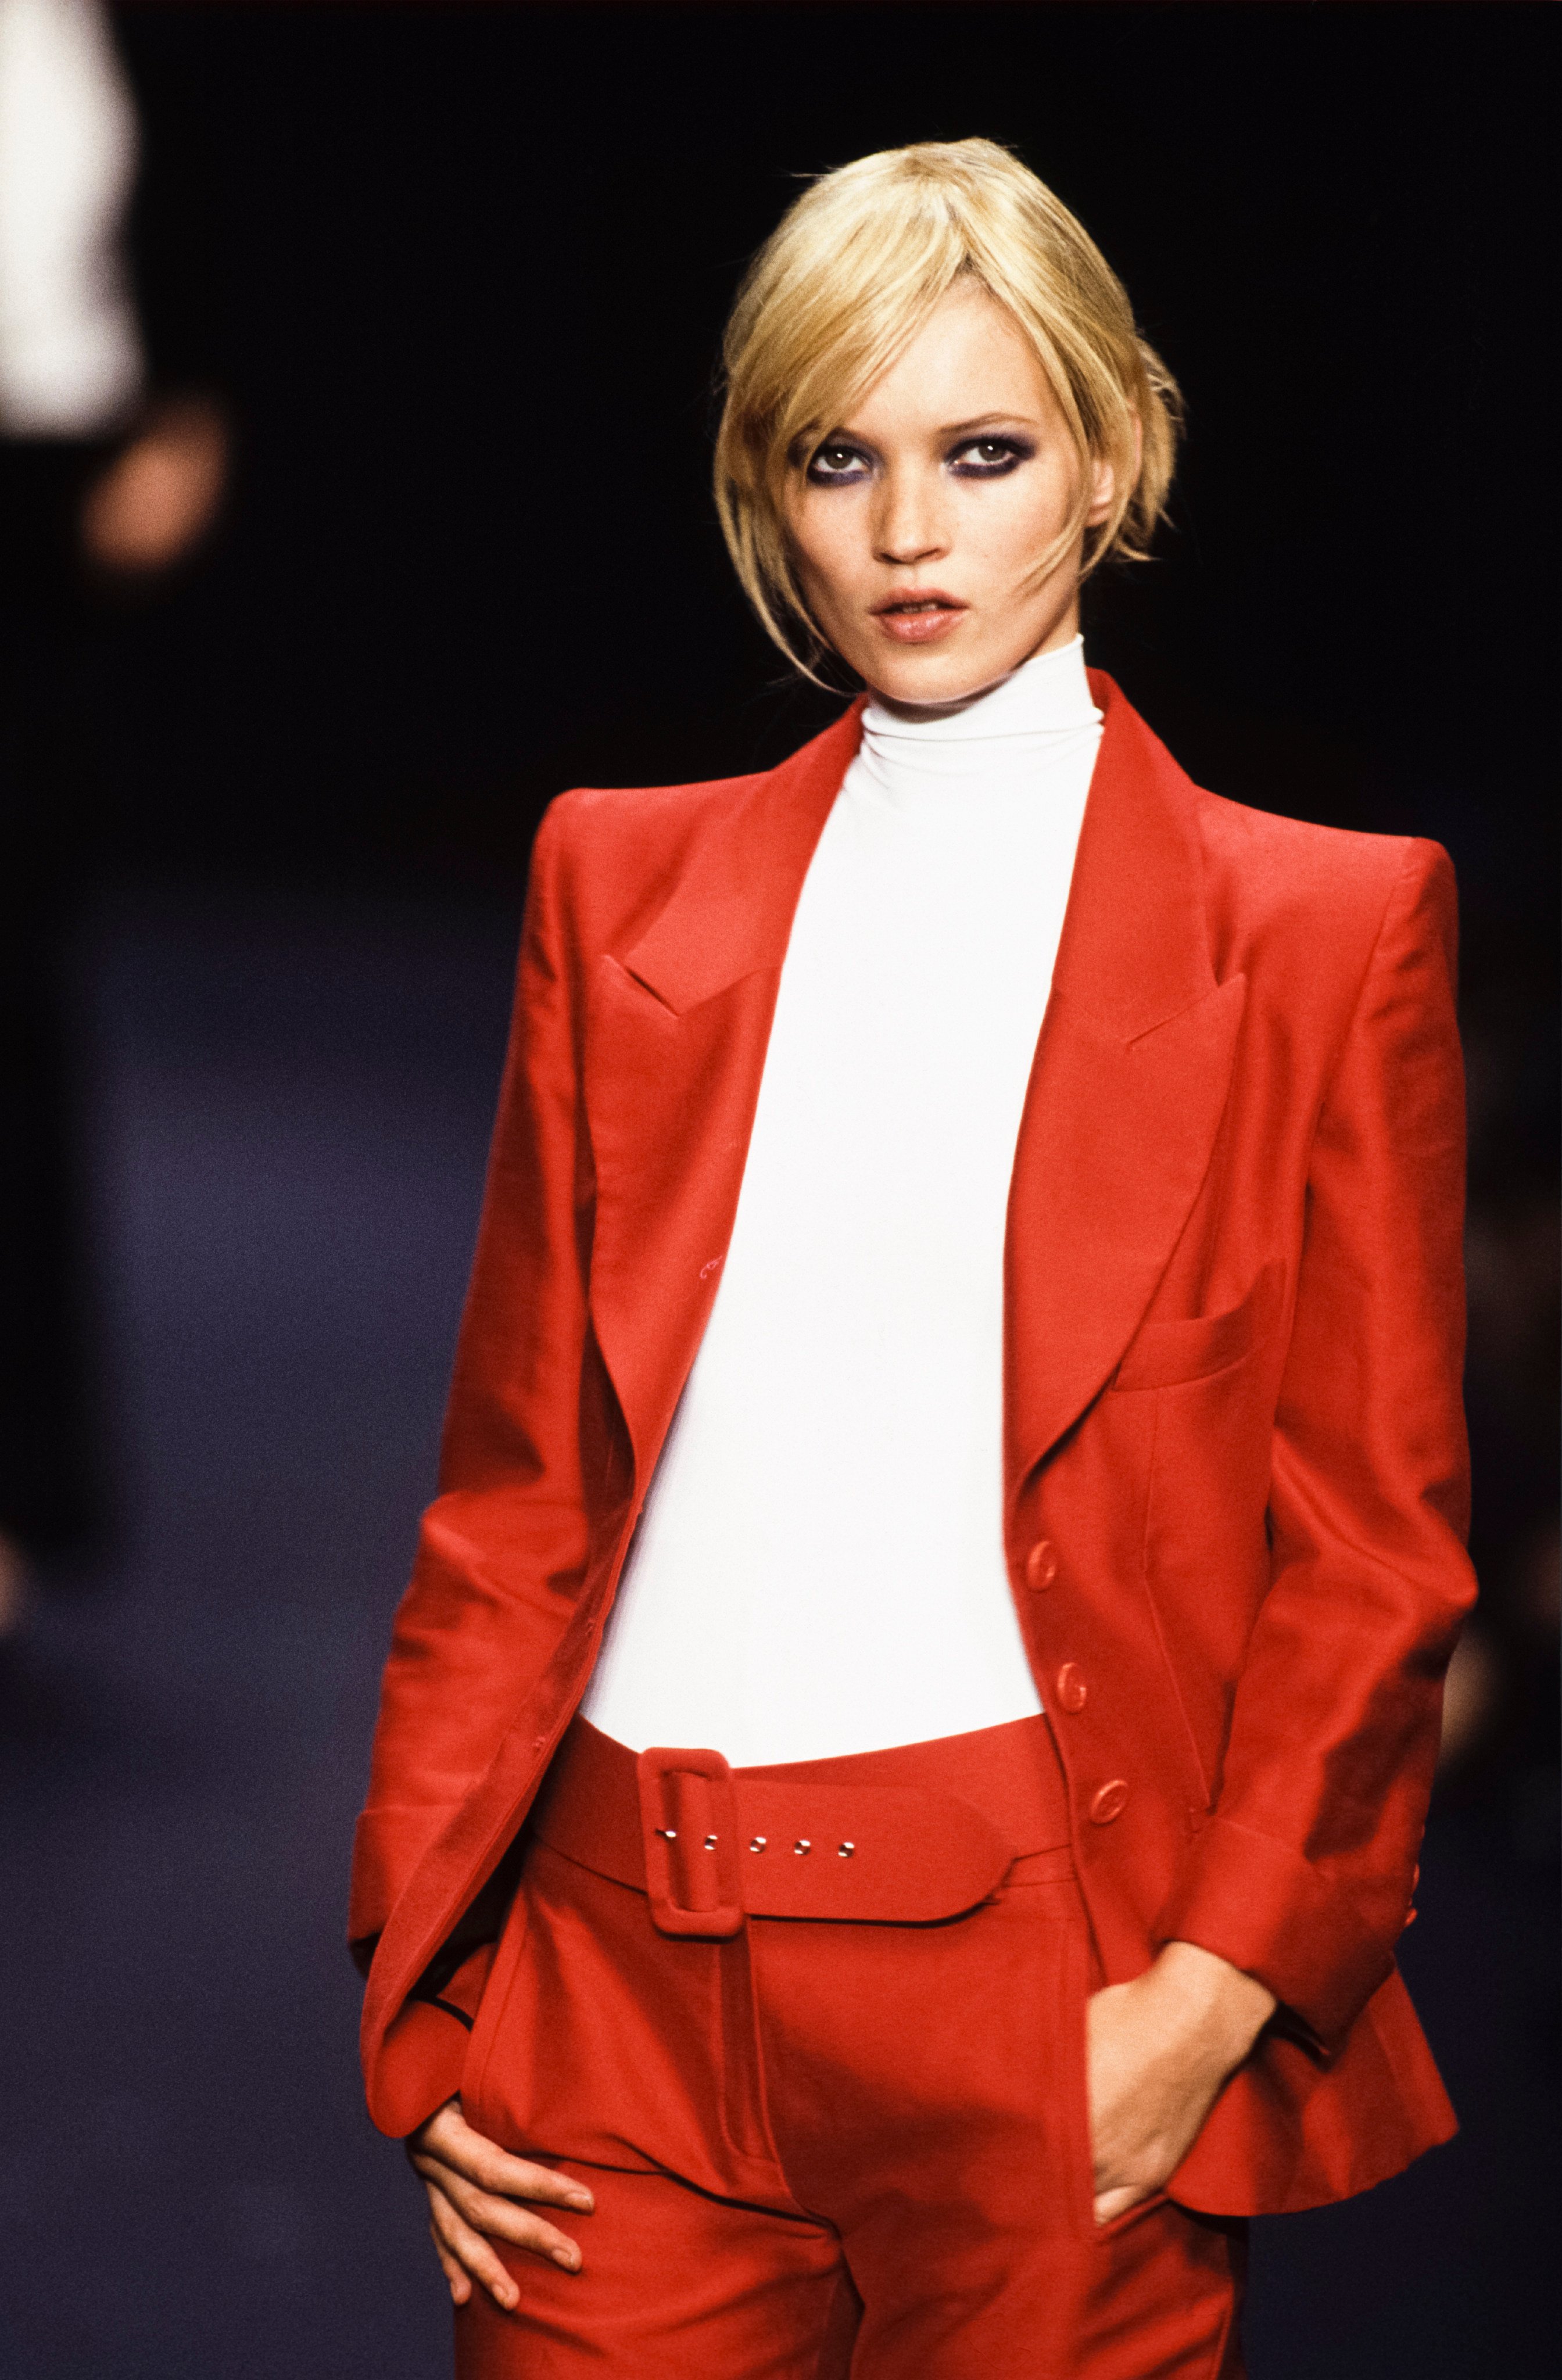 Kate Moss walks the runway in smudged eye make-up and a look from Sonia Rykiel’s spring/summer 1996 collection. The “anti-pretty” make-up look of the era is making a comeback. Photo: Getty Images